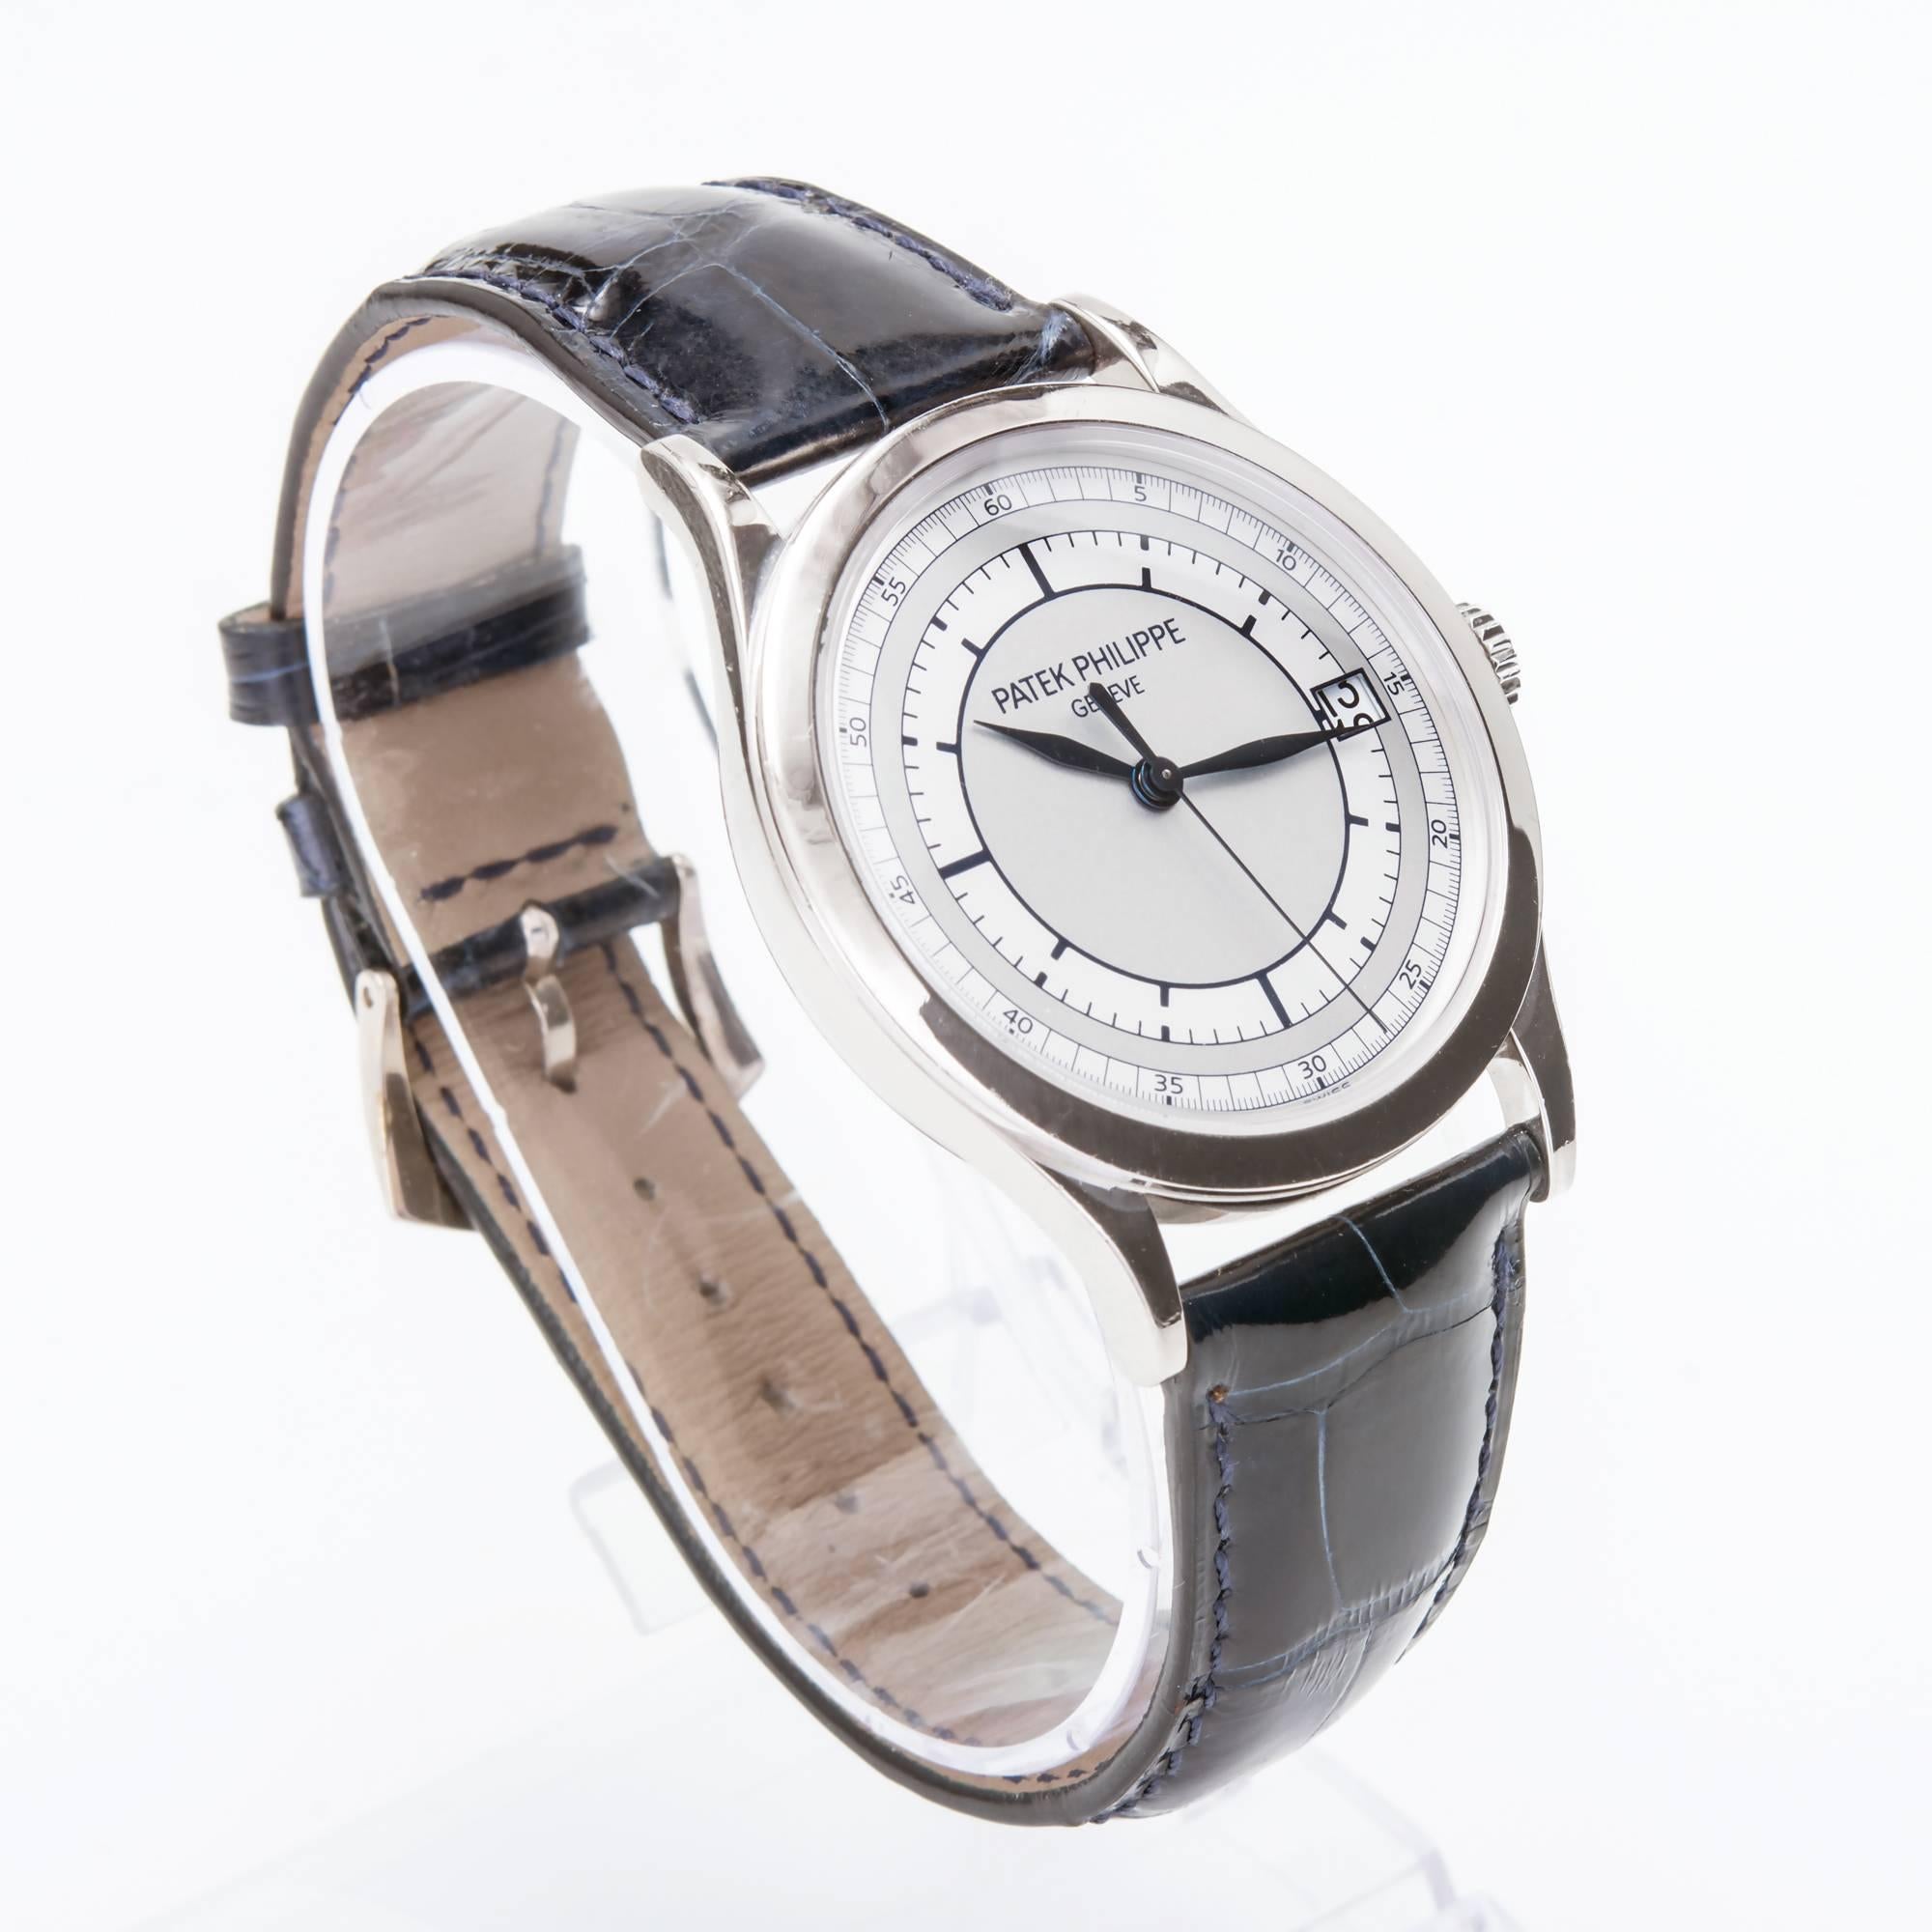 Patek Philippe 18k White Gold Calatrava Automatic Wristwatch with Date, Ref. 5296G, with new Patek strap and 18k white gold Patek buckle. Comes with box but no papers.

18k White Gold 
Length: 46mm 
Width: 38mm 
Strap width at case: 21mm 
Case